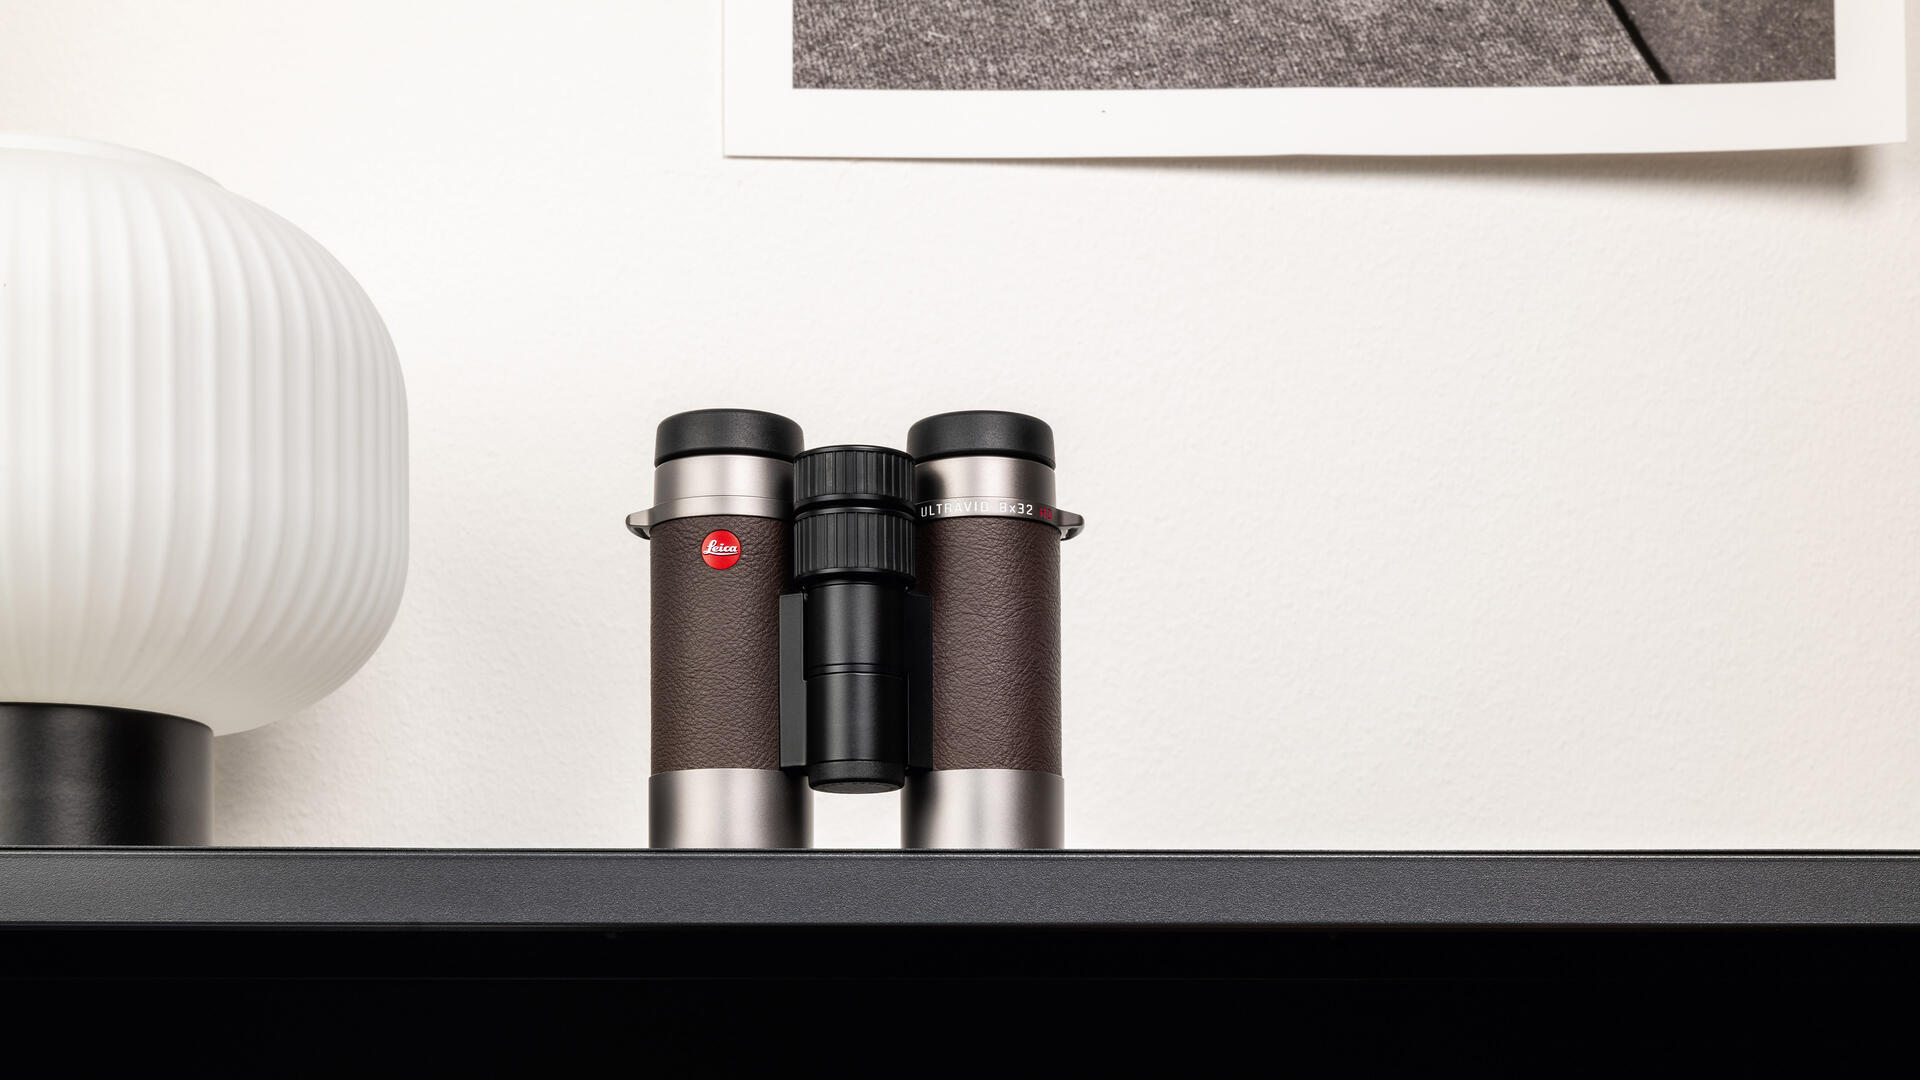 40099_leica-ultravid-8x32-hd-plus-customized-special-edition_hero-content-03